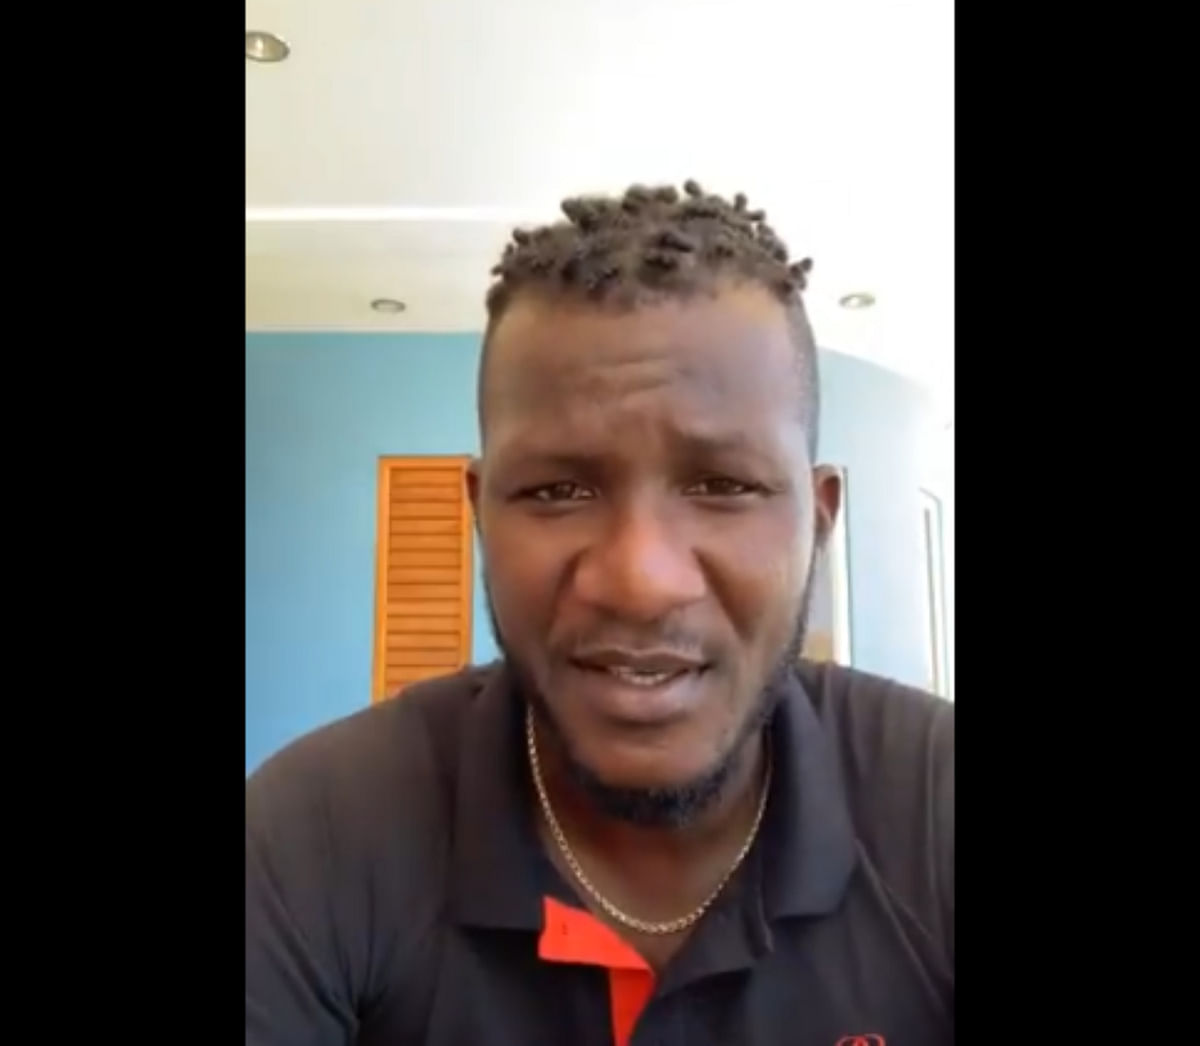 Darren Sammy seeks apology from teammates for racist nickname; Ishant's 2014 post confirms it was used